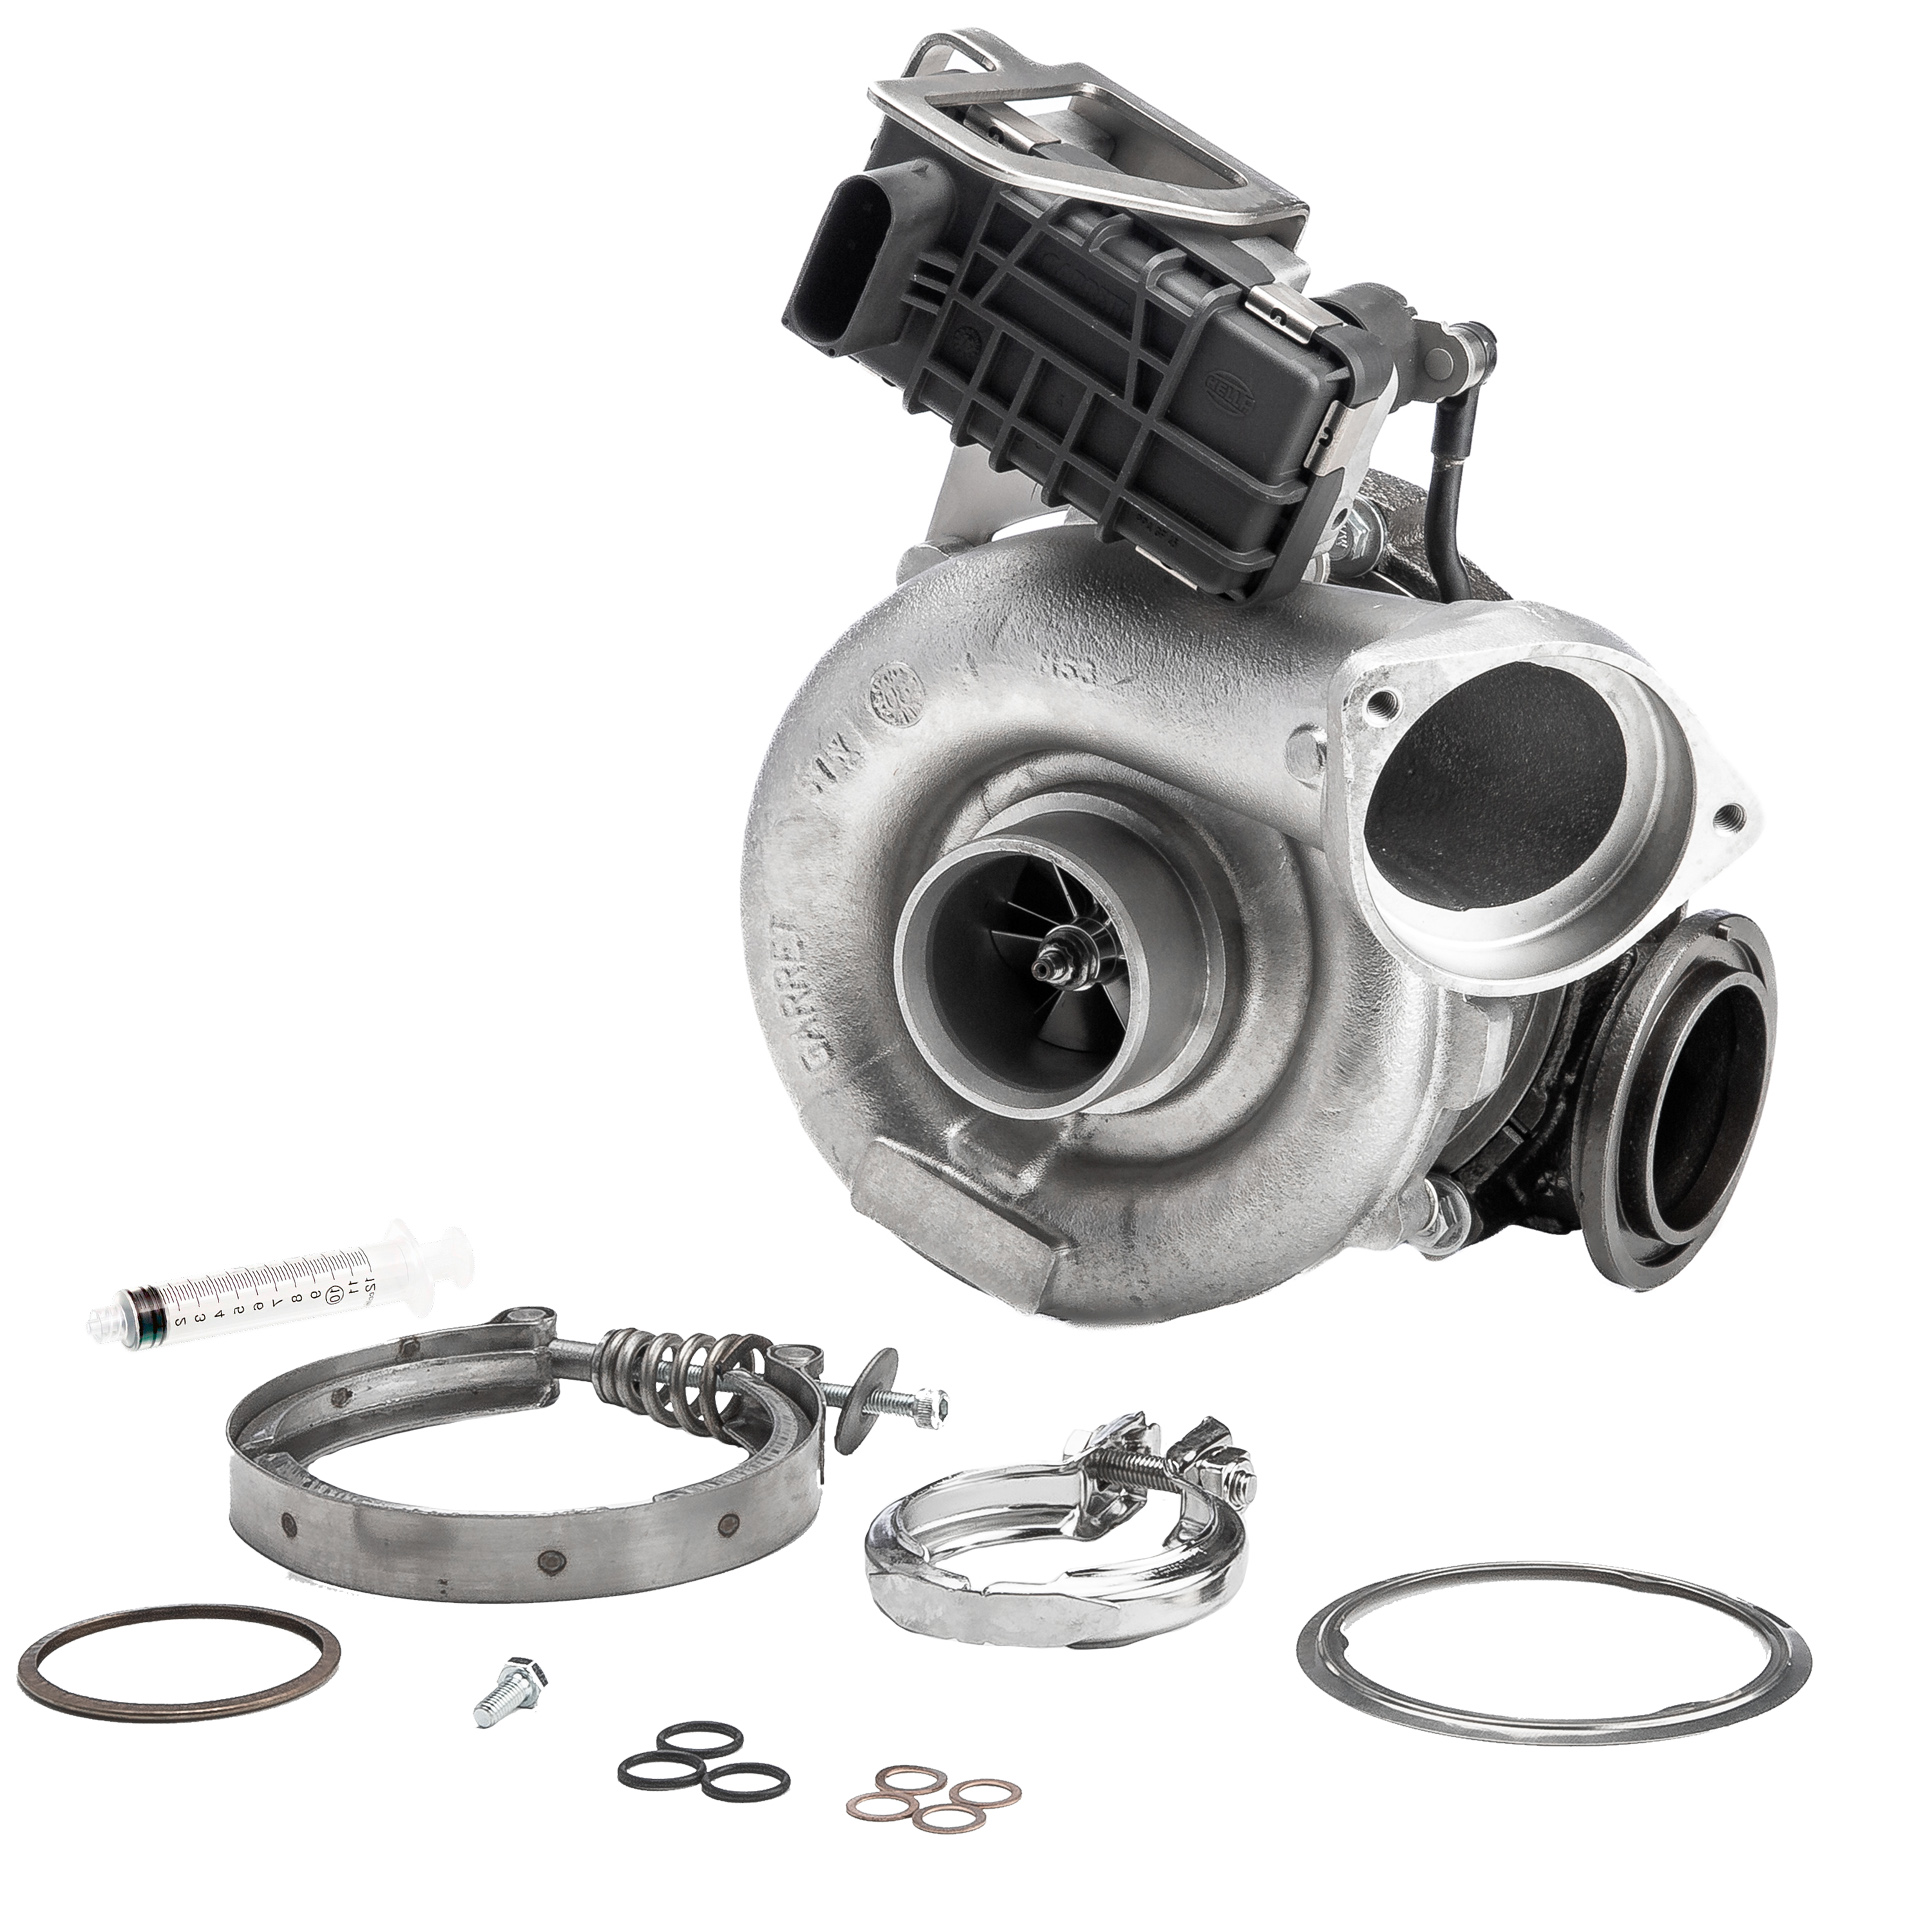 BR Turbo Turbo, with attachment material Turbo 758351-5001RSM buy